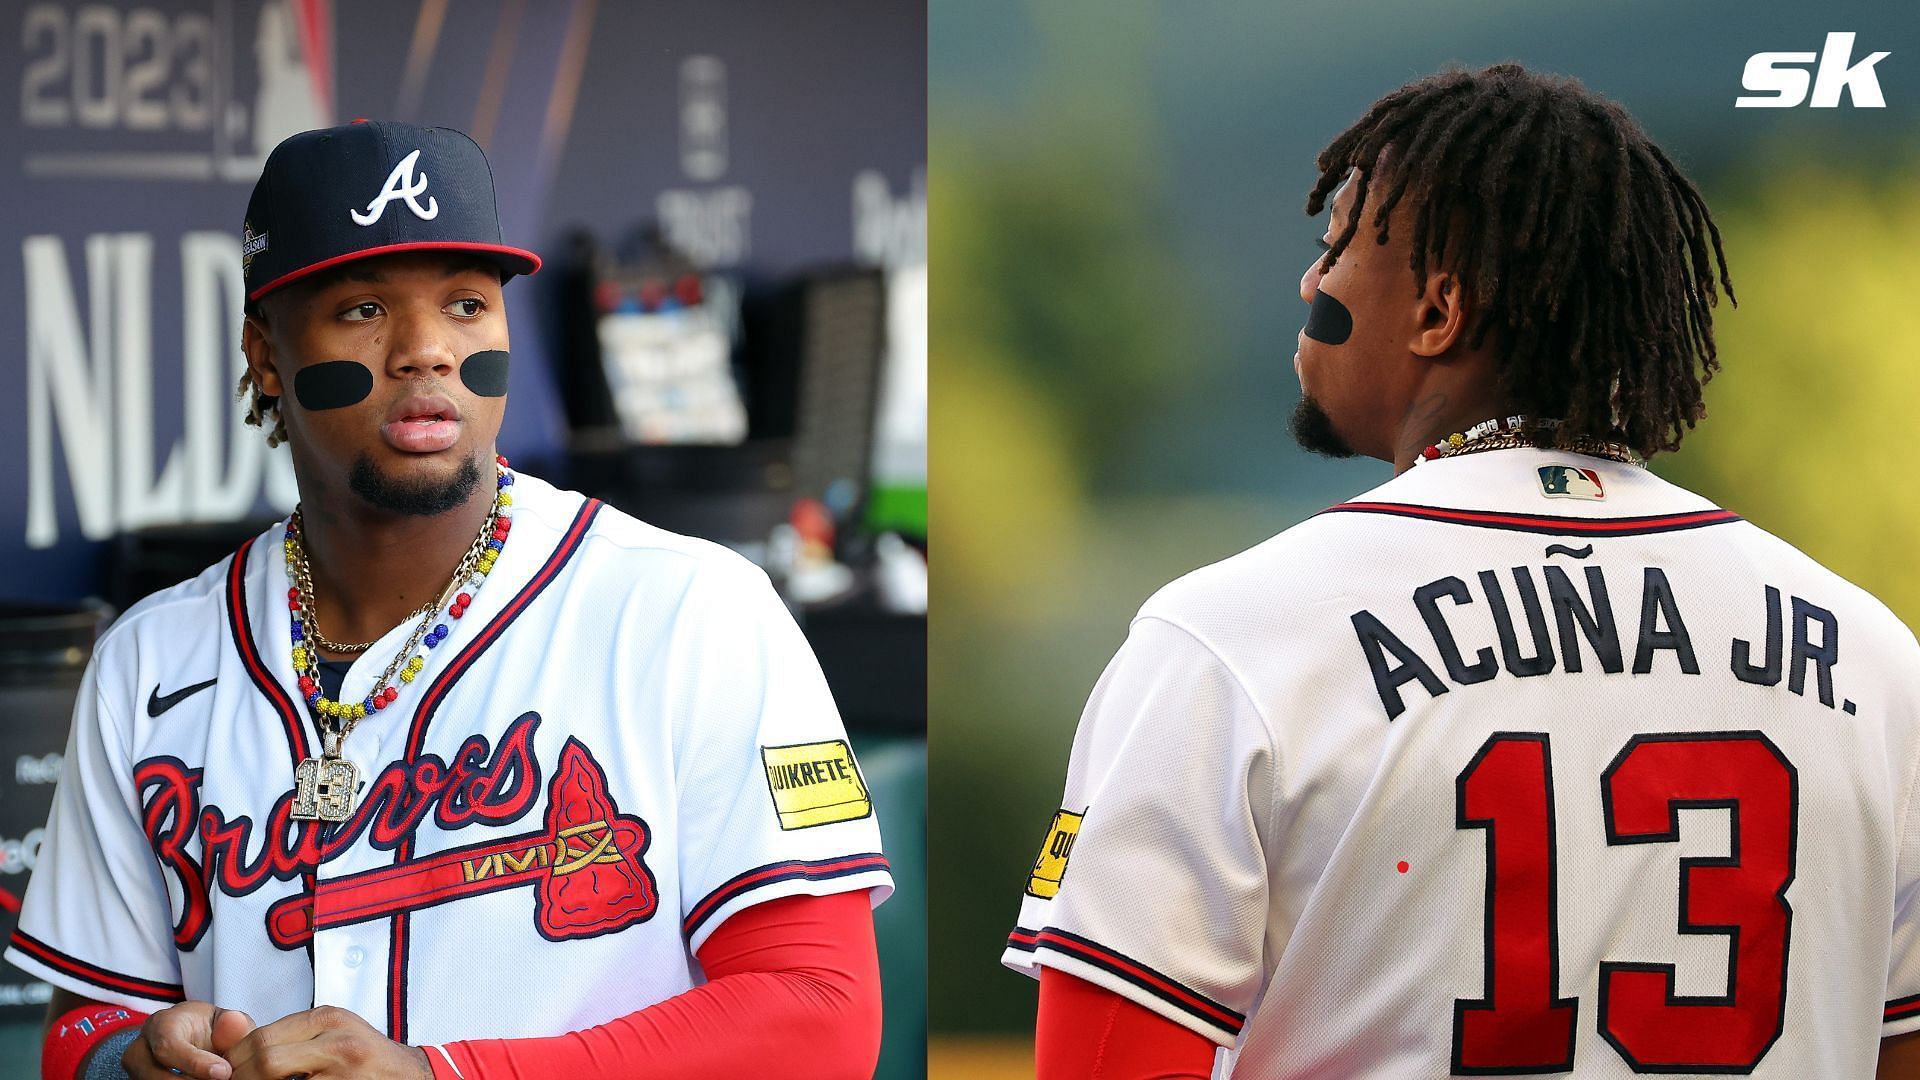 Ronald Acuna Jr. told the media that he wants to remain a member of the Atlanta Braves for the duration of his career